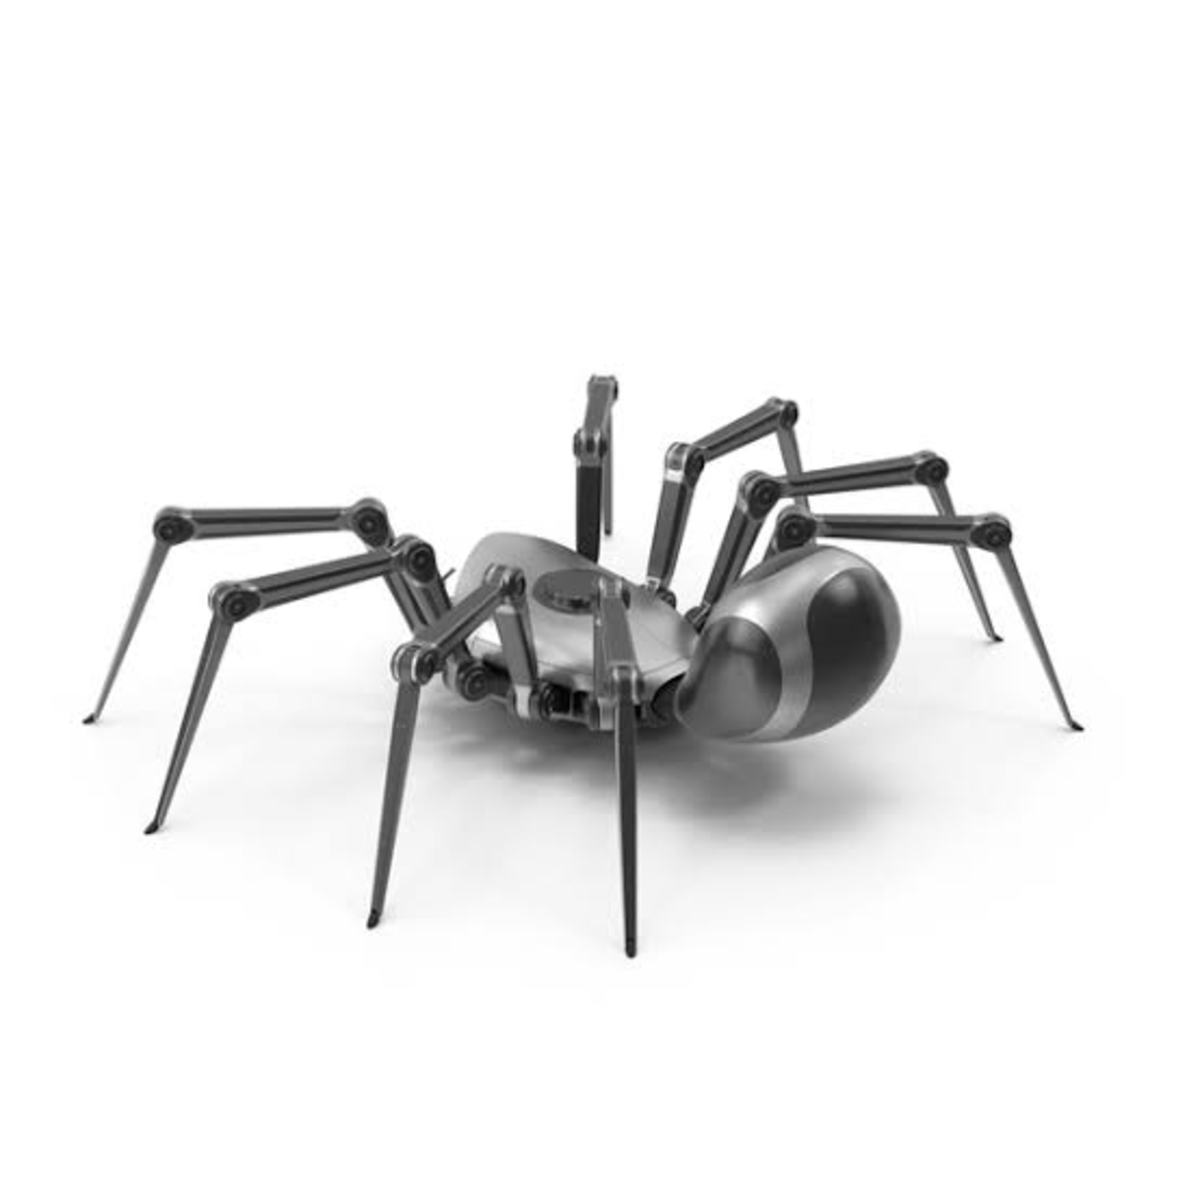 robots-are-being-made-from-dead-spiders-shocking-discovery-of-scientists